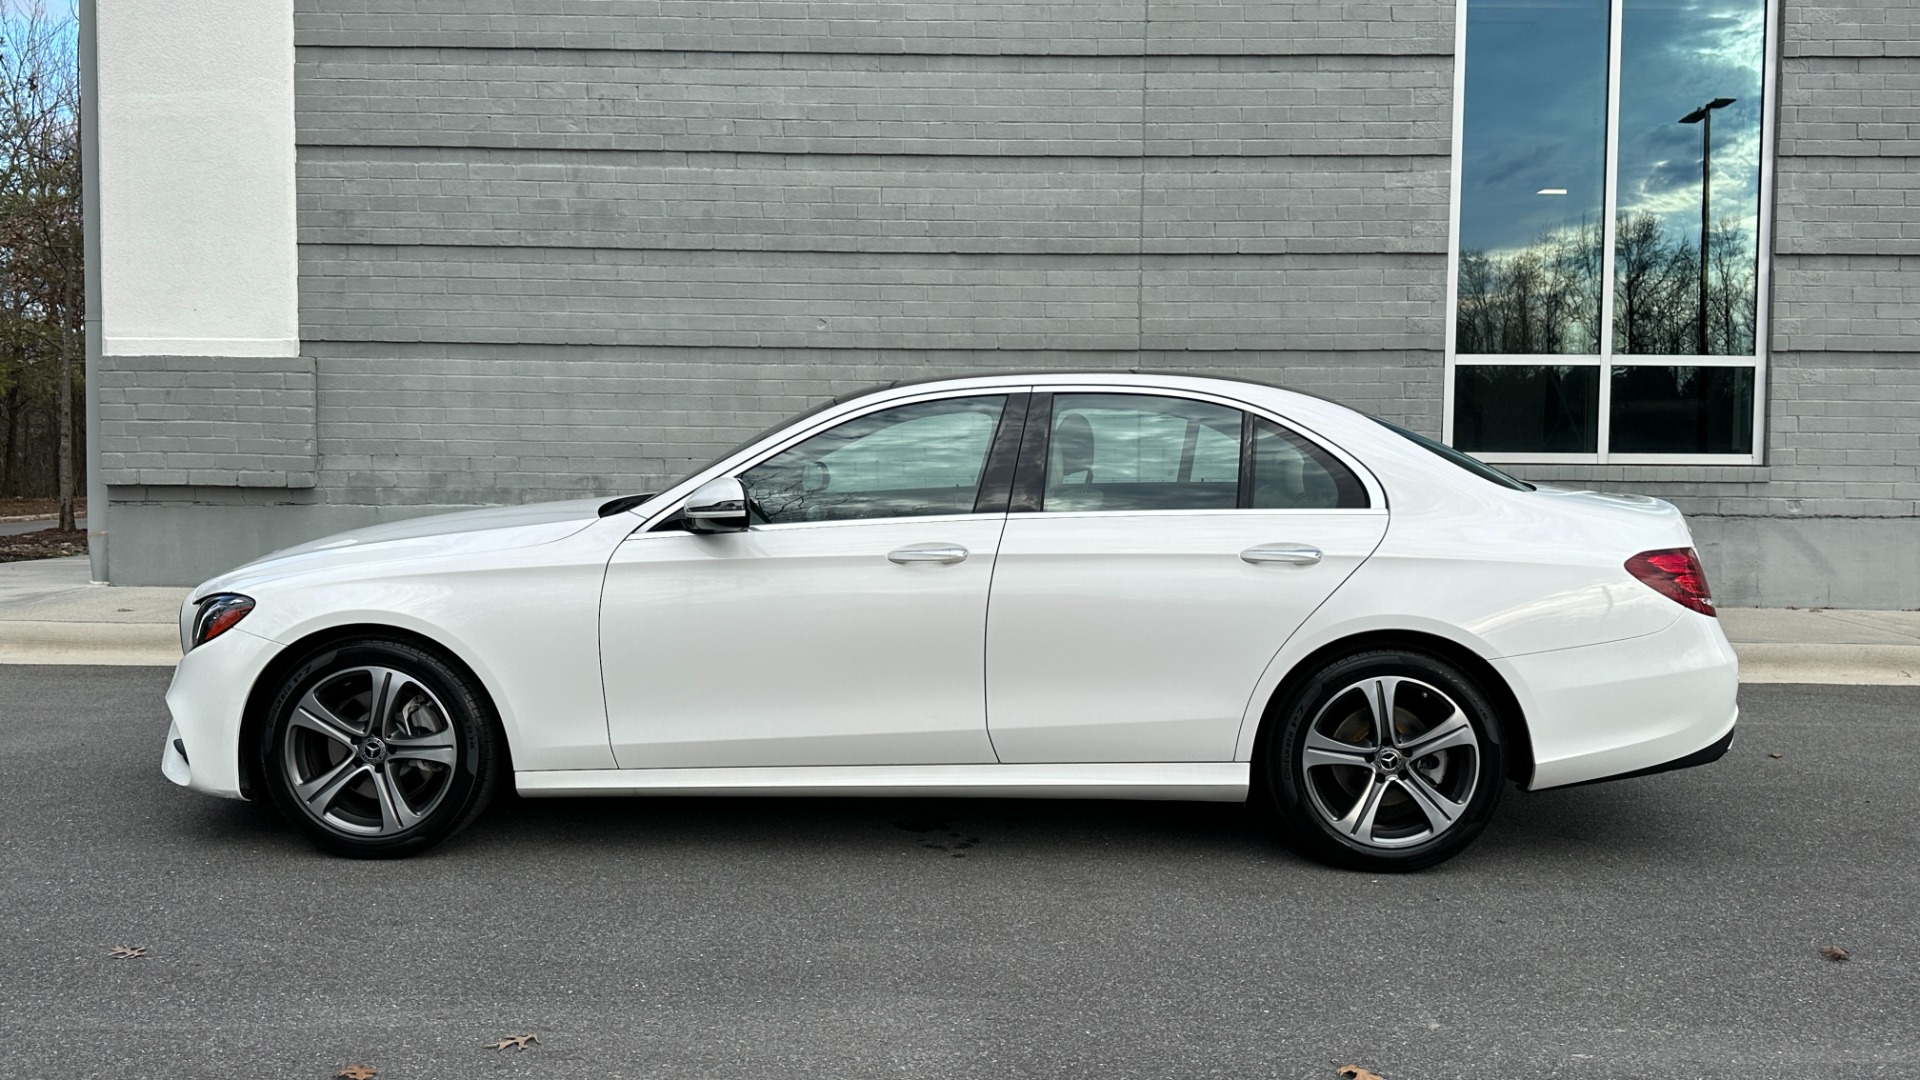 Used 2019 Mercedes-Benz E-Class E300 / PREMIUM PACKAGE / BLIND SPOT / BURMESTER SOUND / HEATED STEERING for sale $35,400 at Formula Imports in Charlotte NC 28227 6